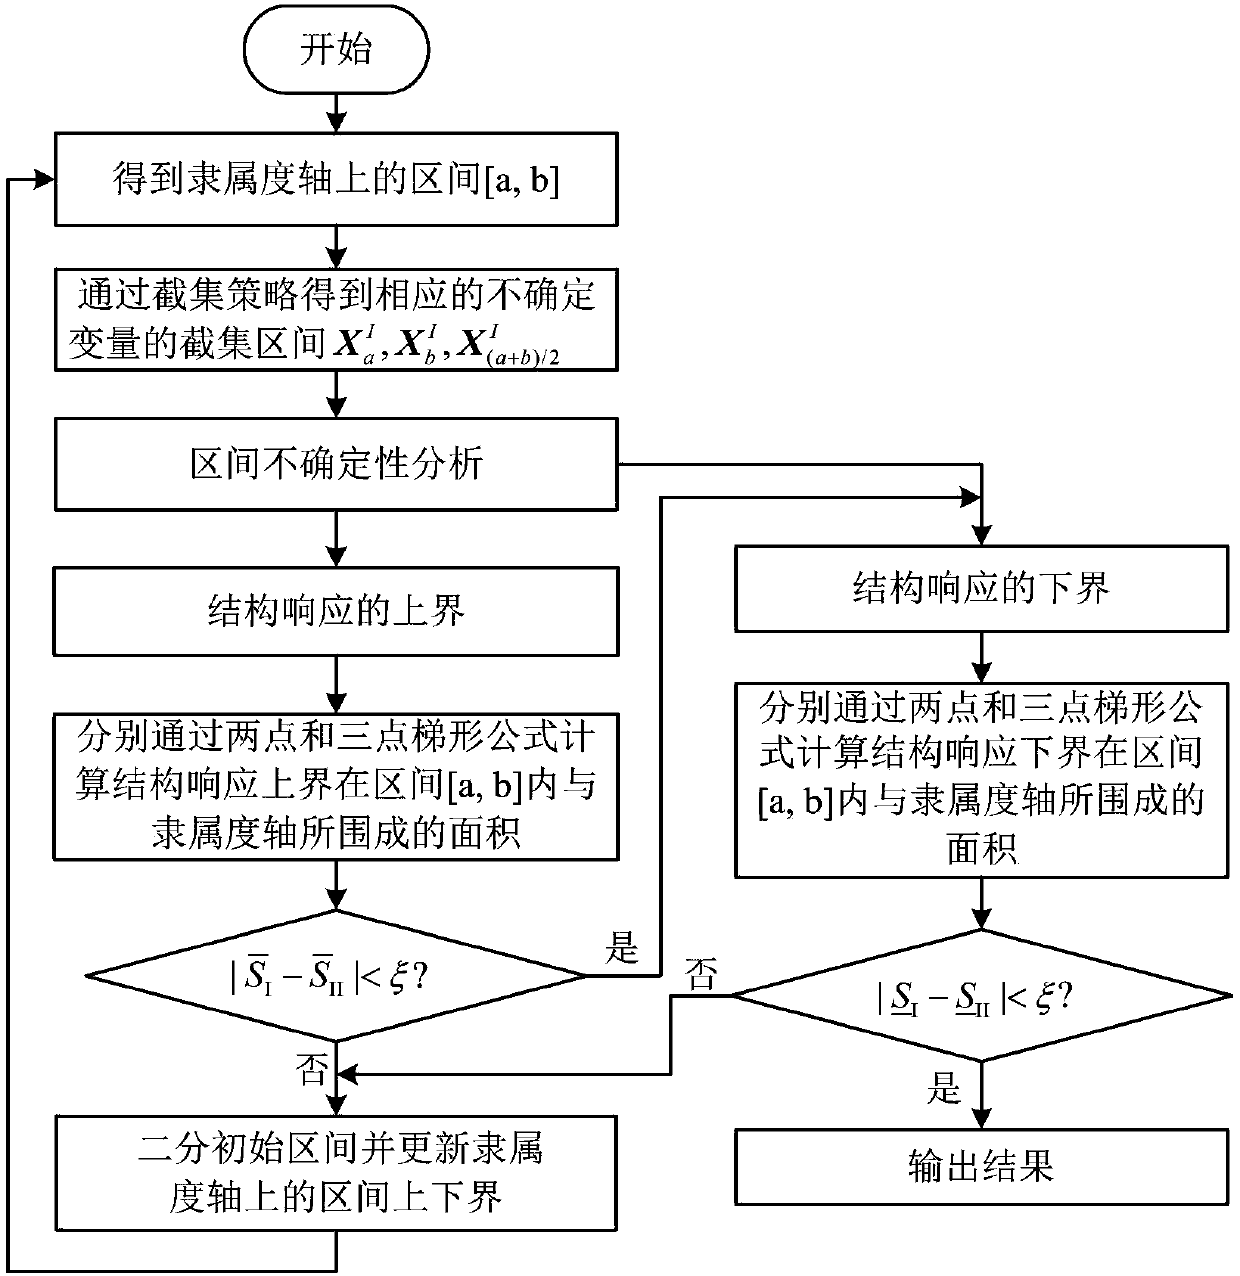 Structural fuzzy uncertainty analysis method based on self-adapting matching points